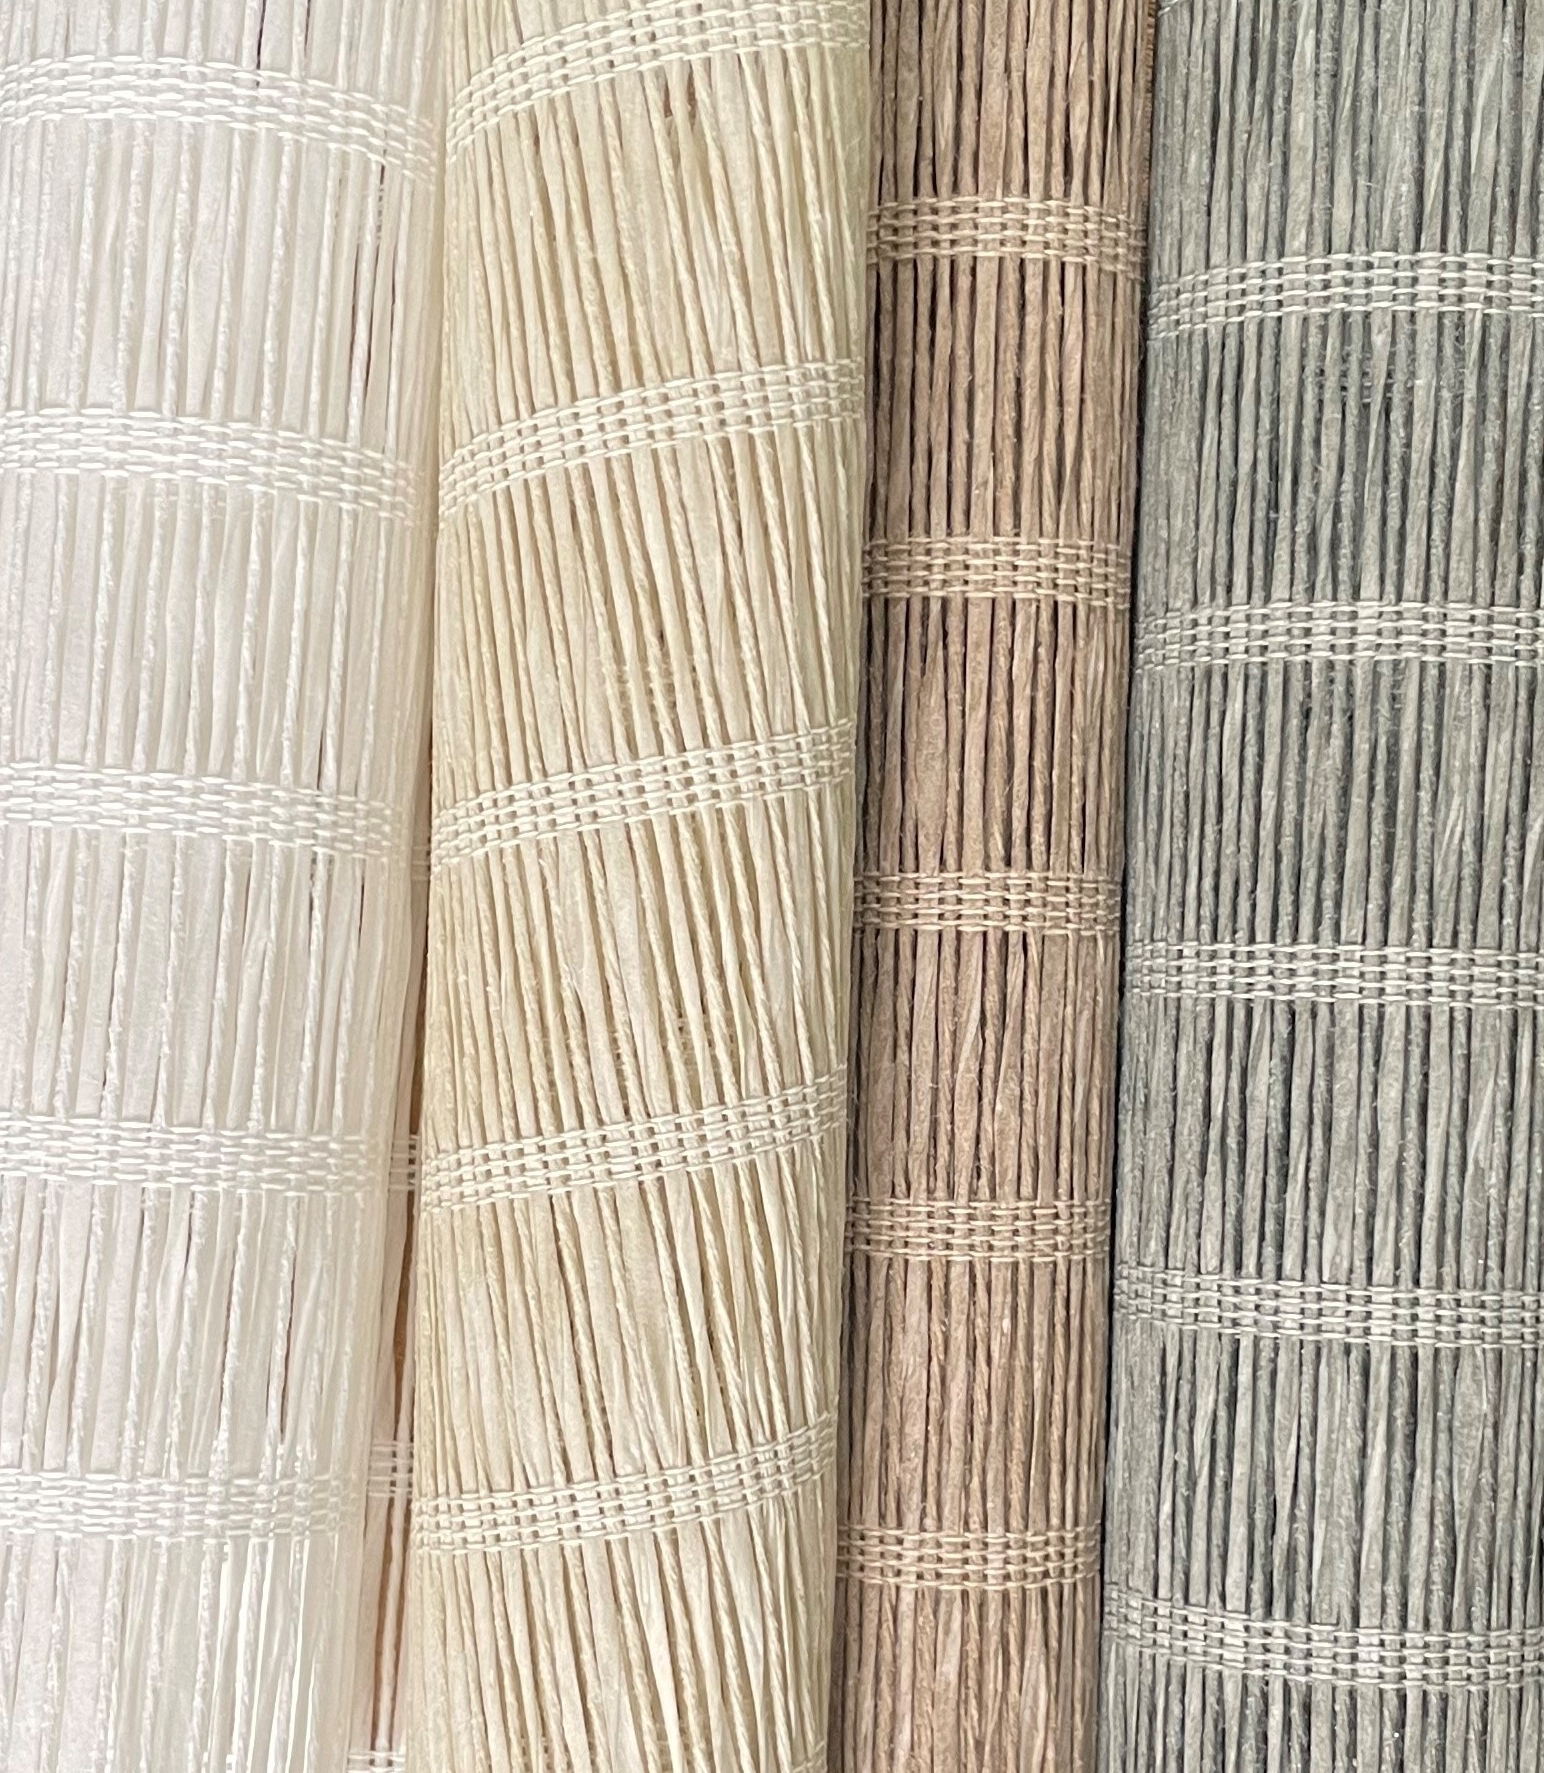 Inside Blinds - Craft and nature - window decoration - window coverings - natural materials